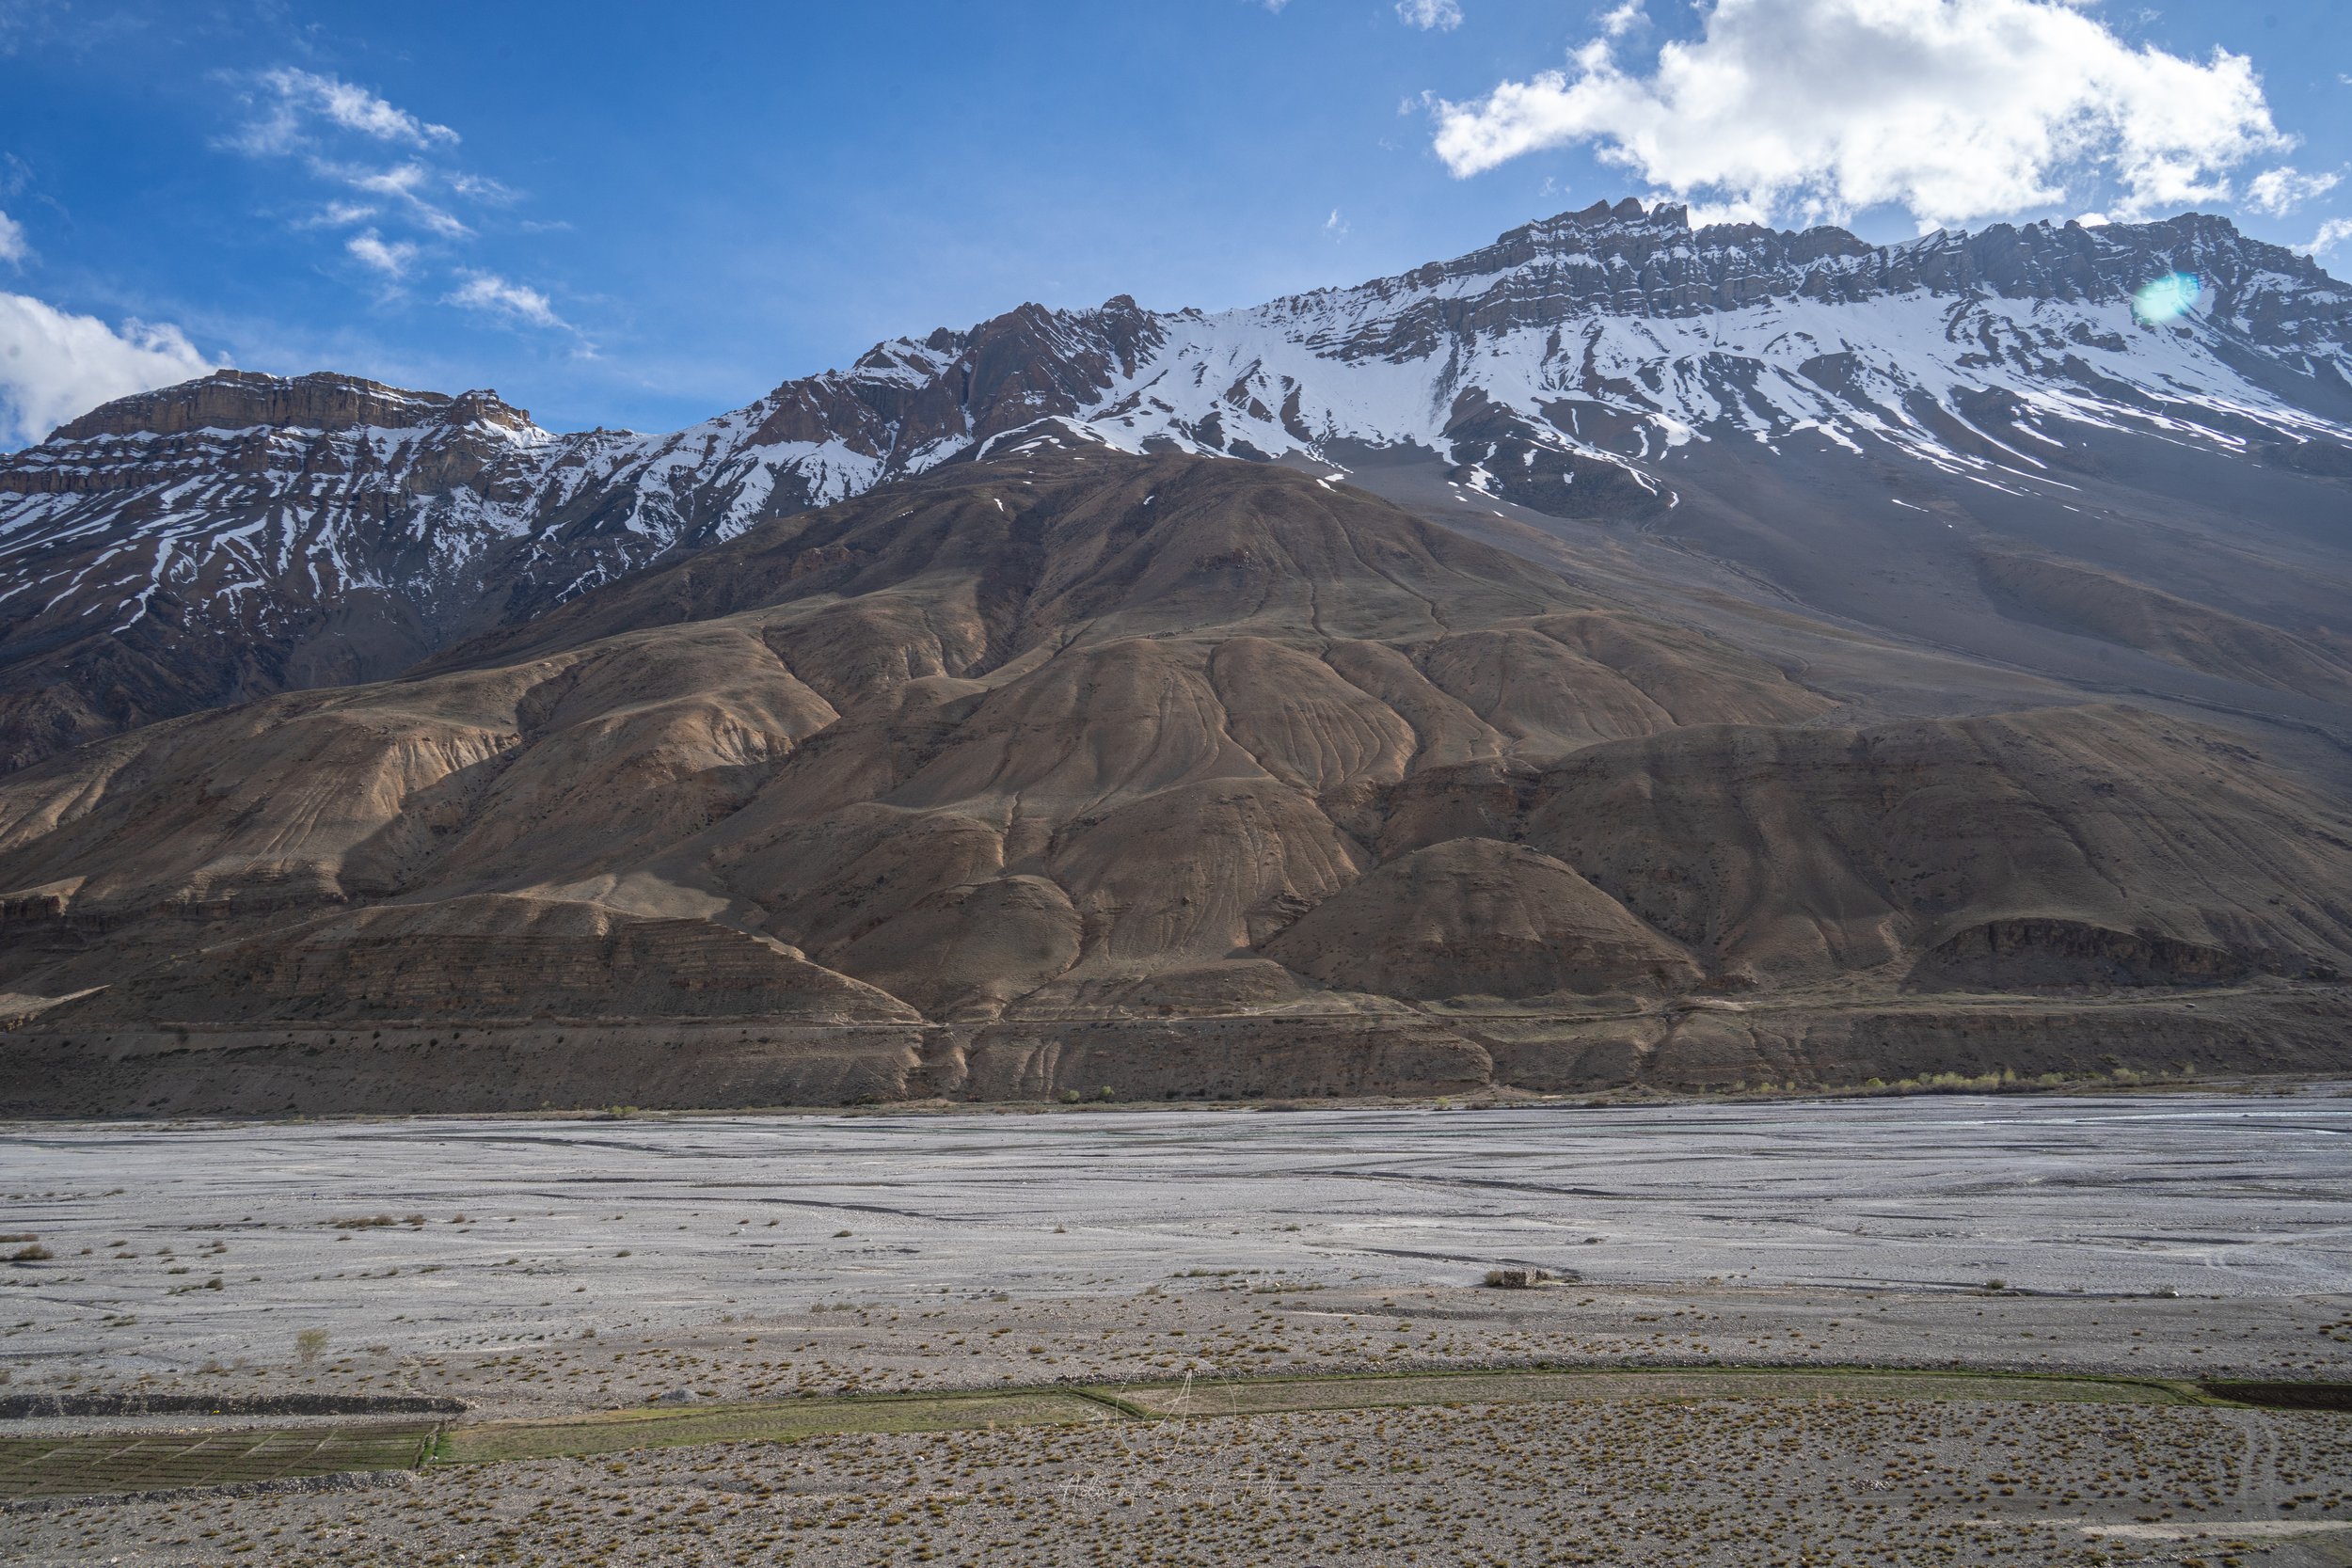 Kaza Photos, Images and Pictures